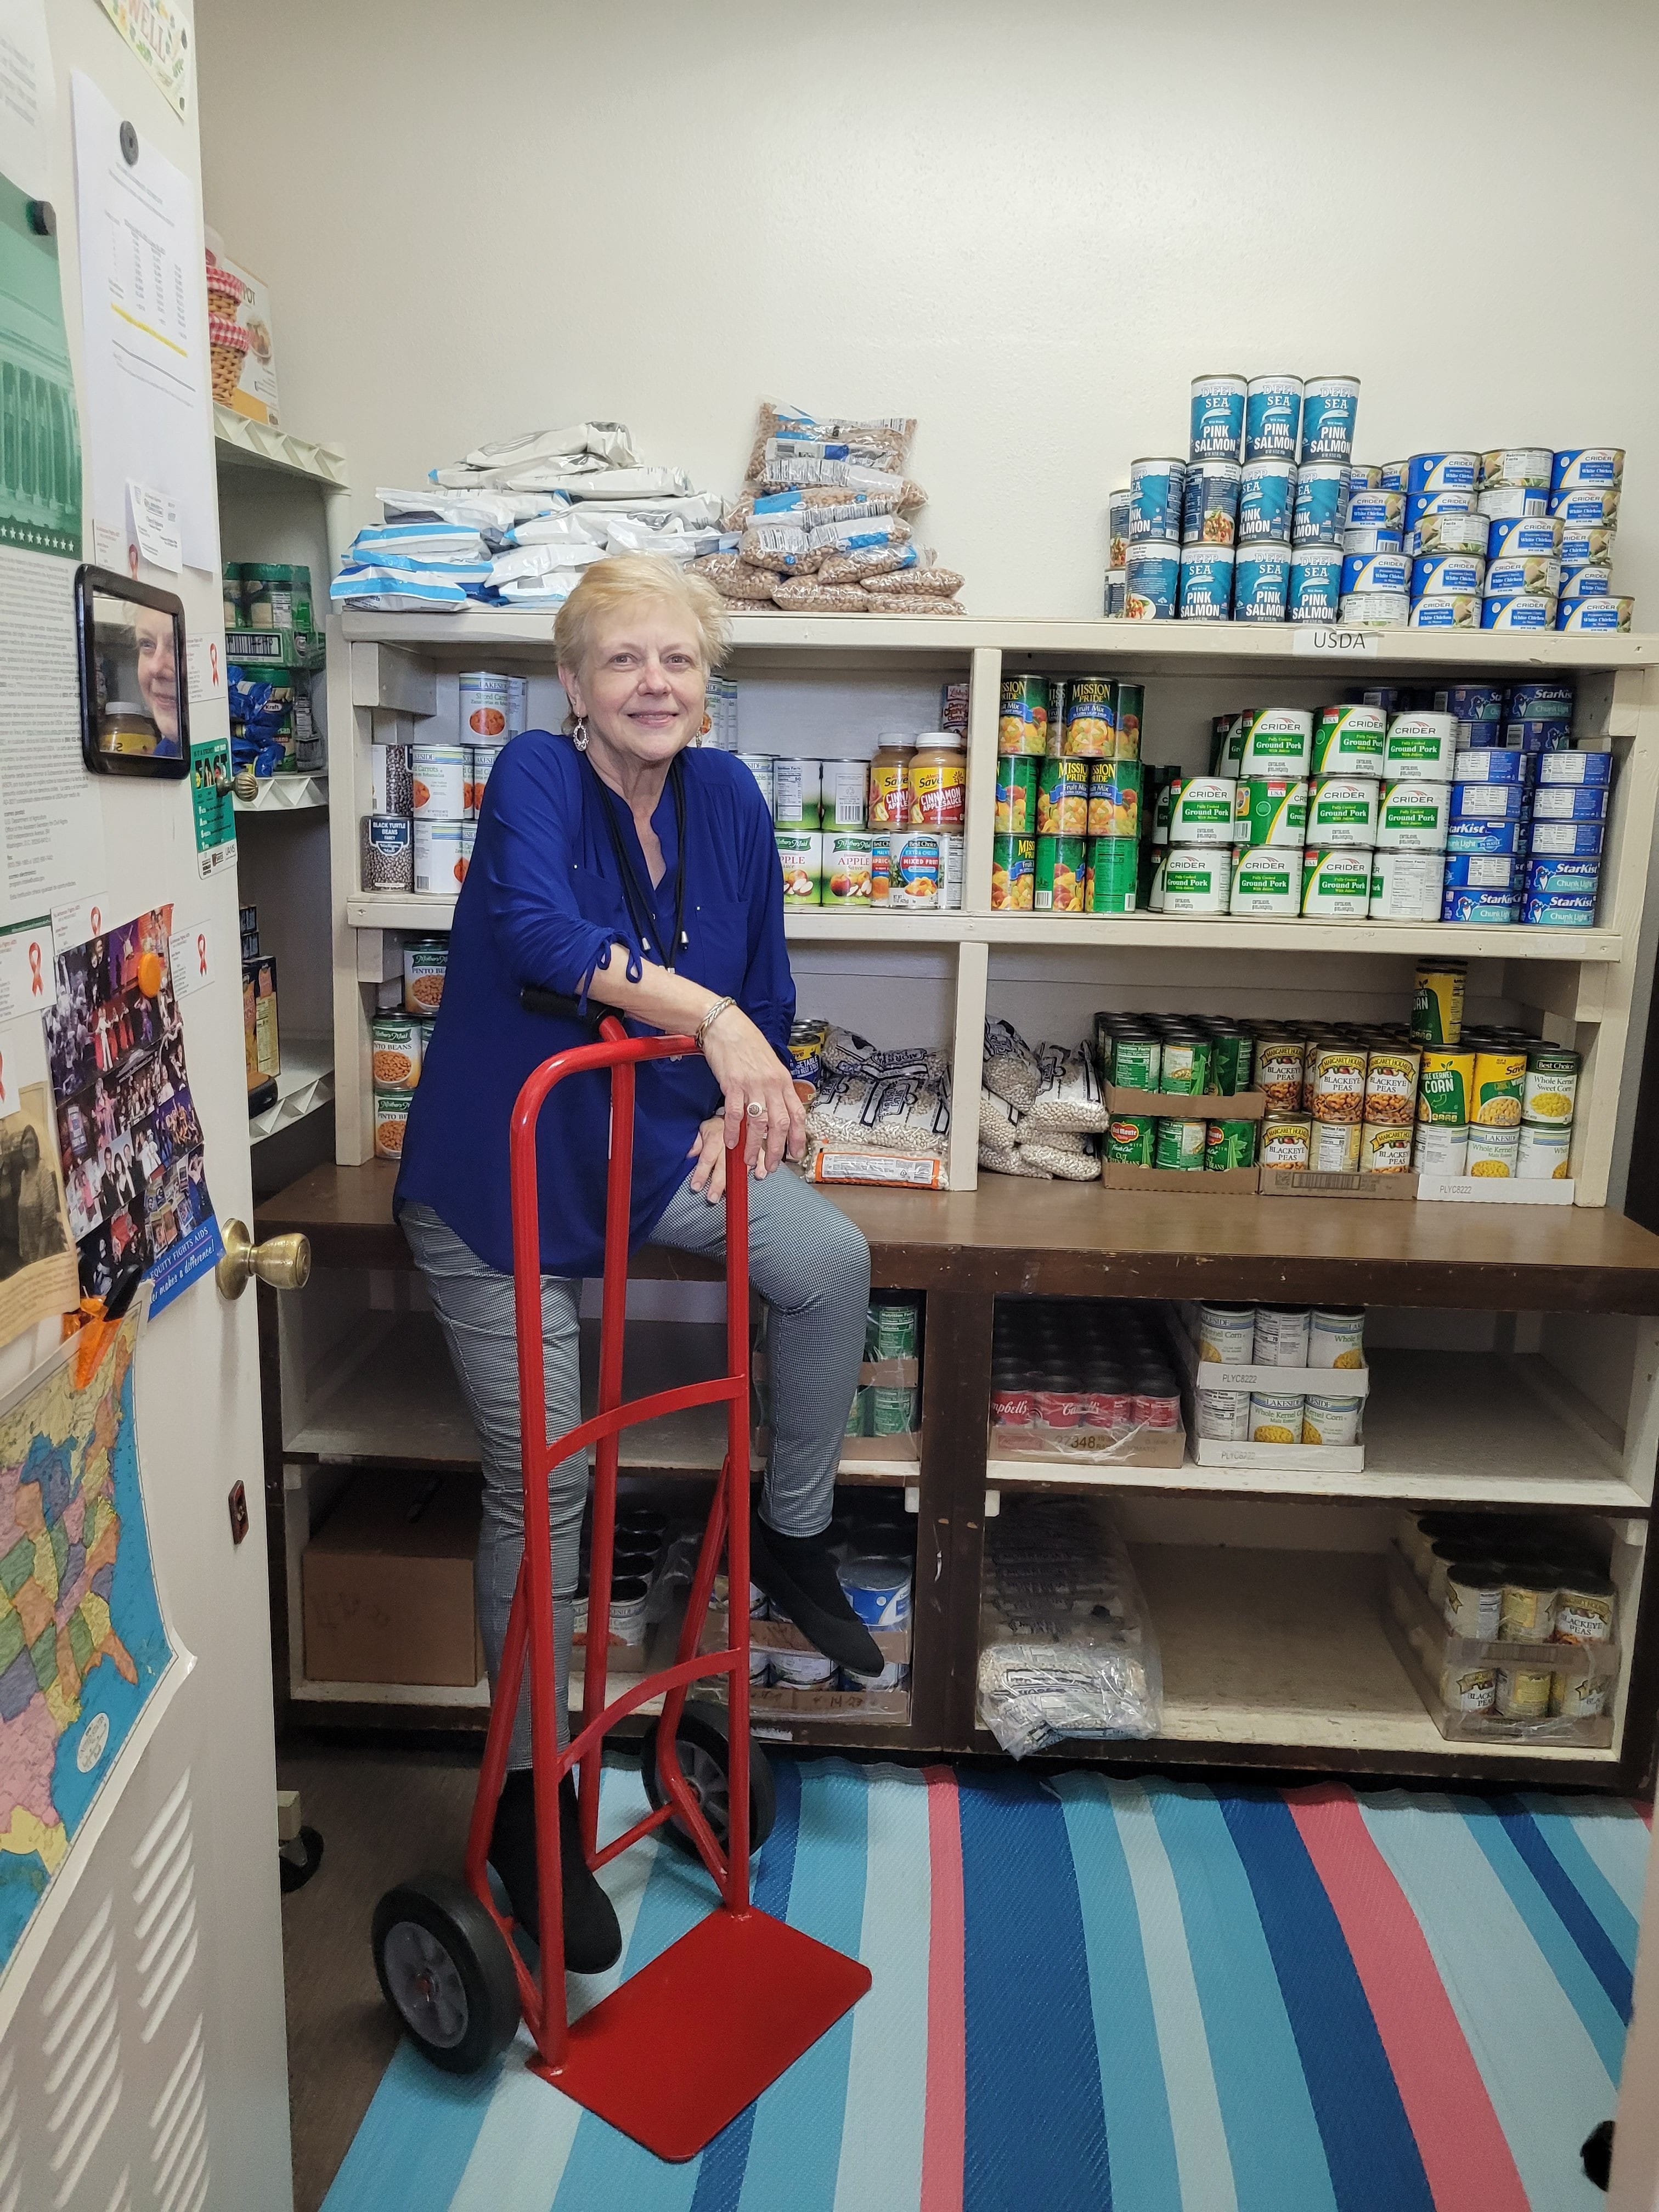 Director of SAFA since 2001. Putting in a hard days work restocking the pantry.